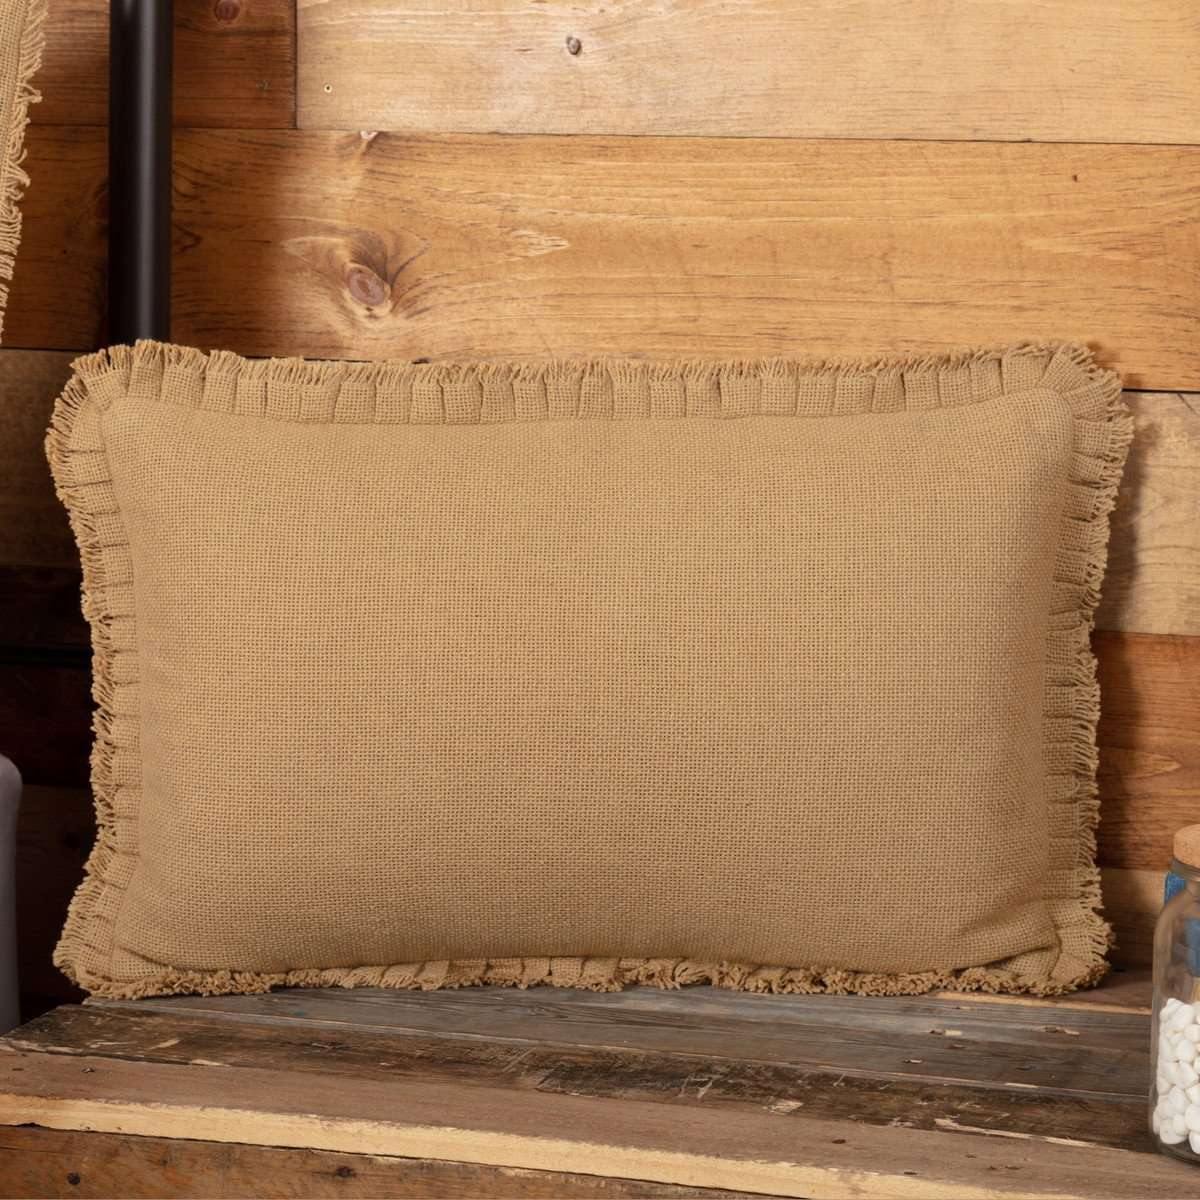 Burlap Natural Pillow w/ Fringed Ruffle 14x22 VHC Brands